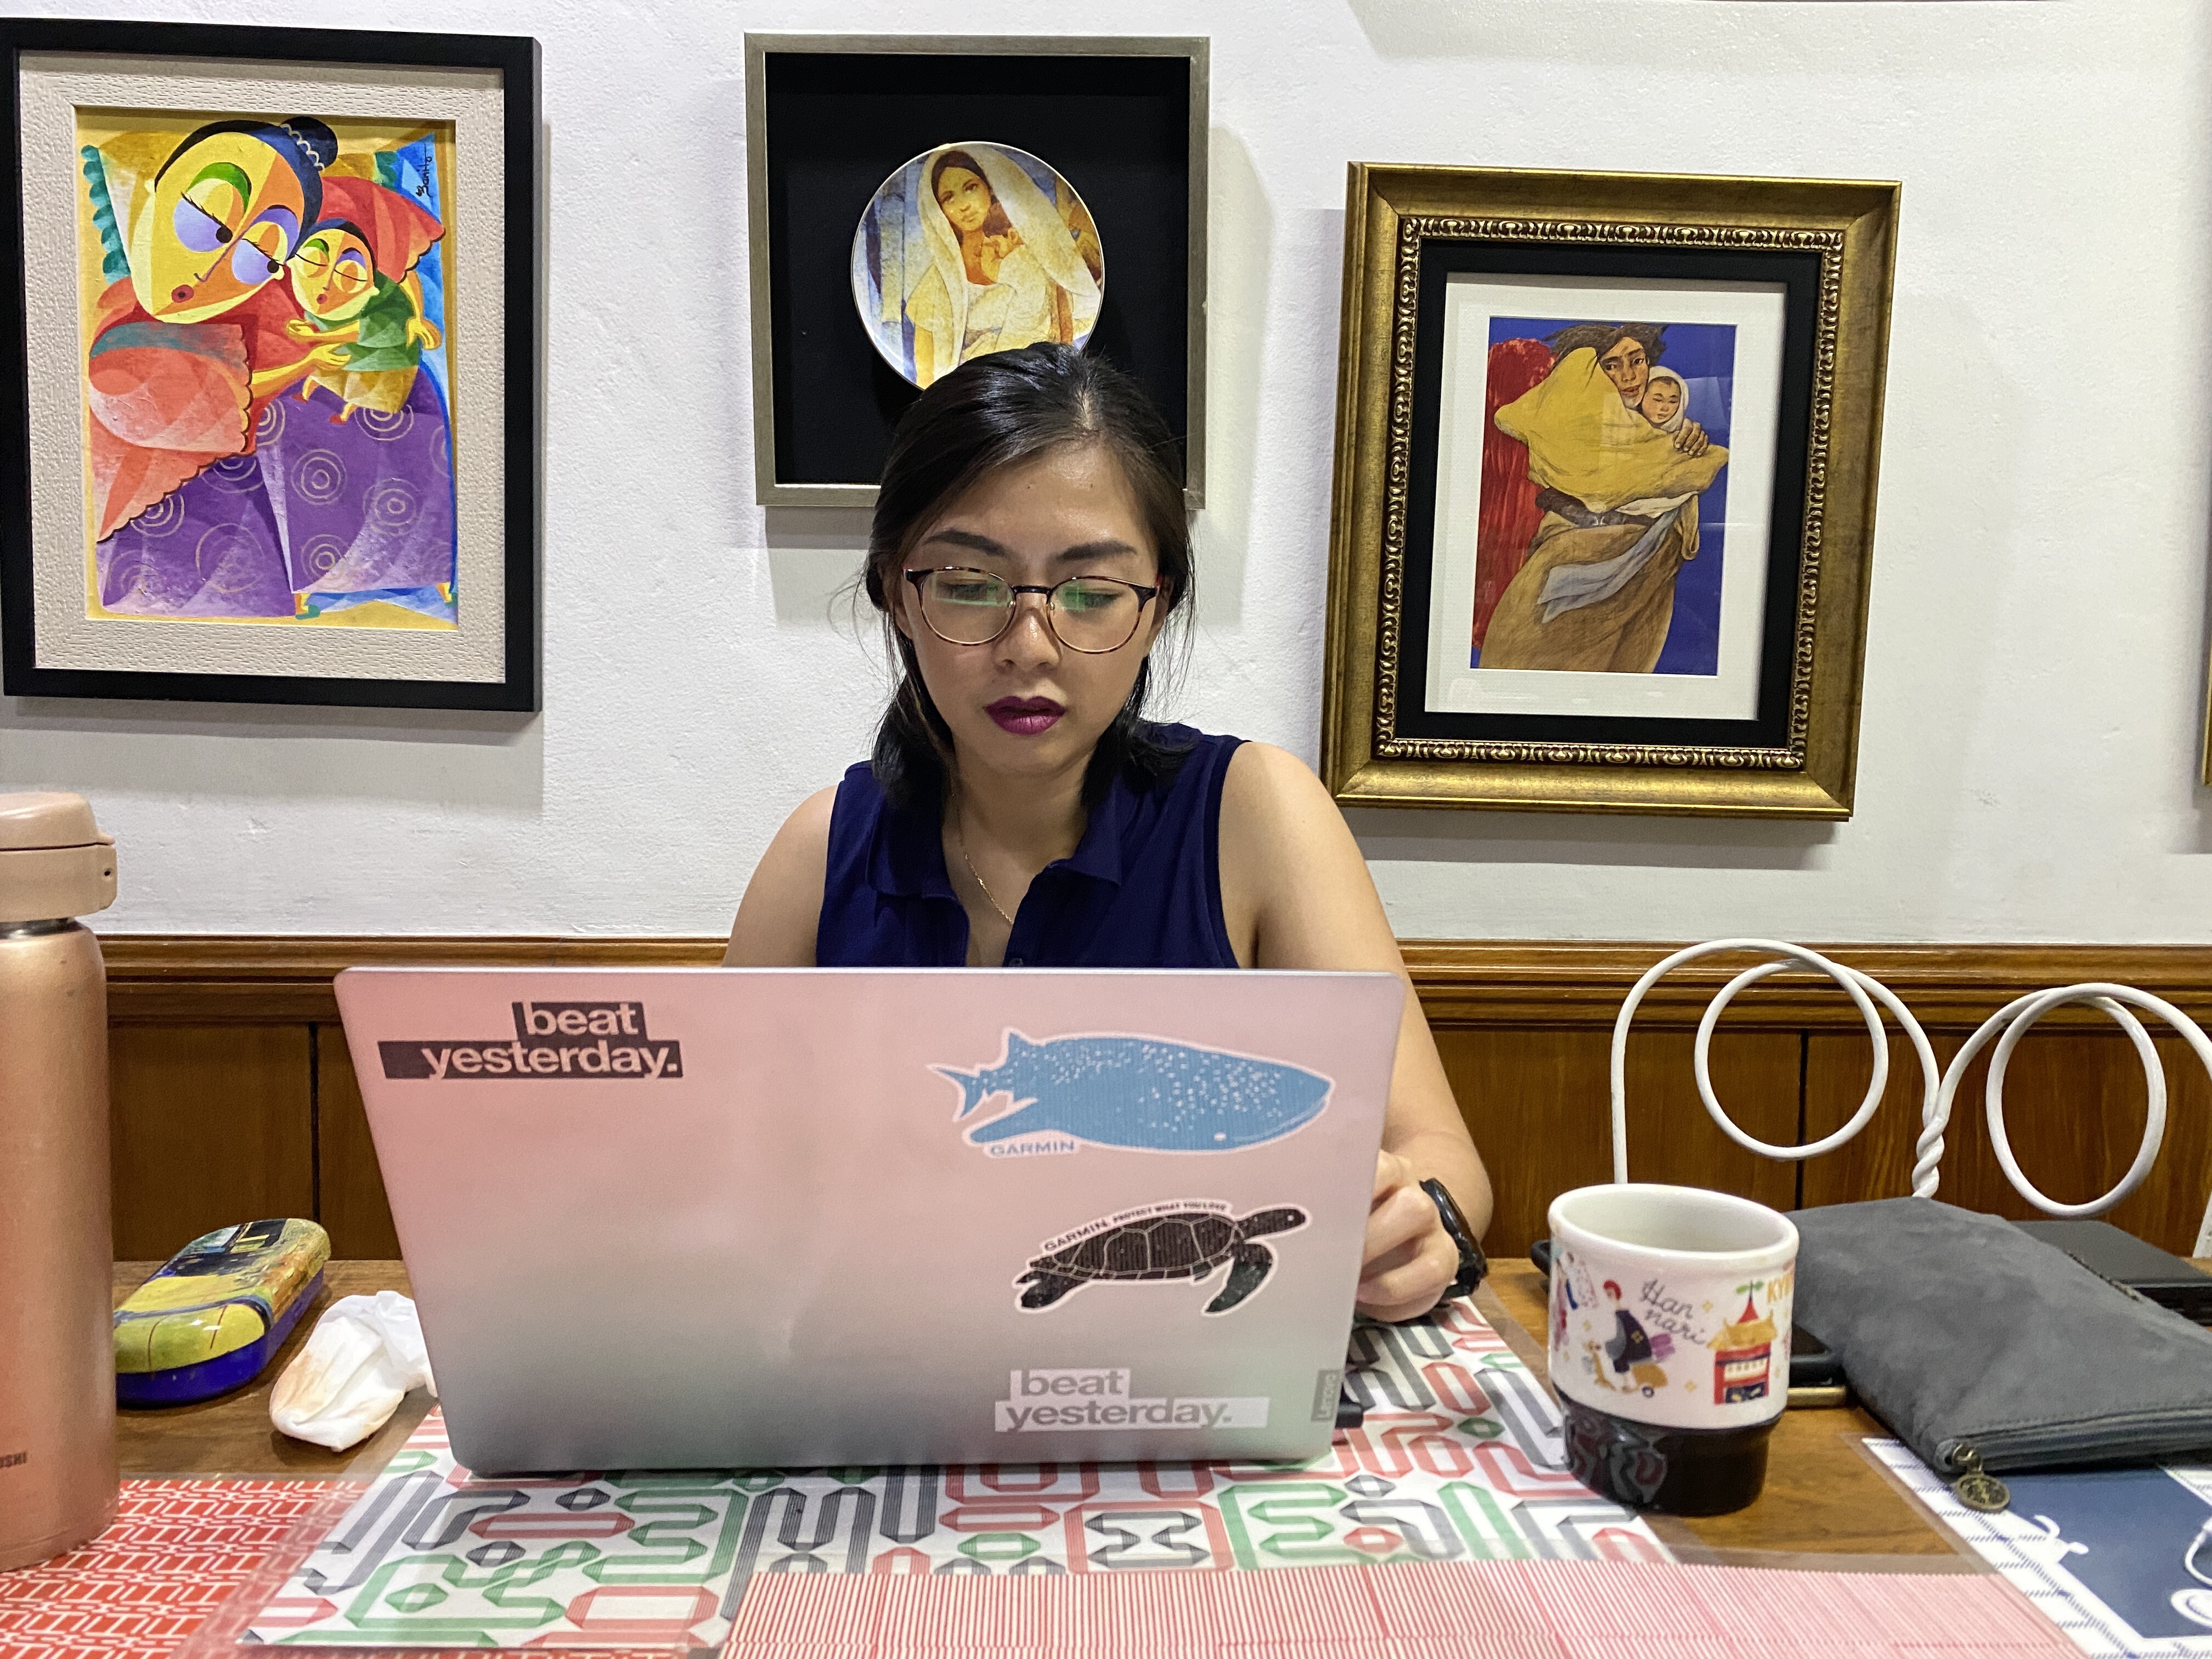 Like millions of other office workers across the world, Abigail Bautist has been forced to work from home as governments across the region impose lockdowns and quarantines to prevent the spread of the novel coronavirus. Photo: Handout